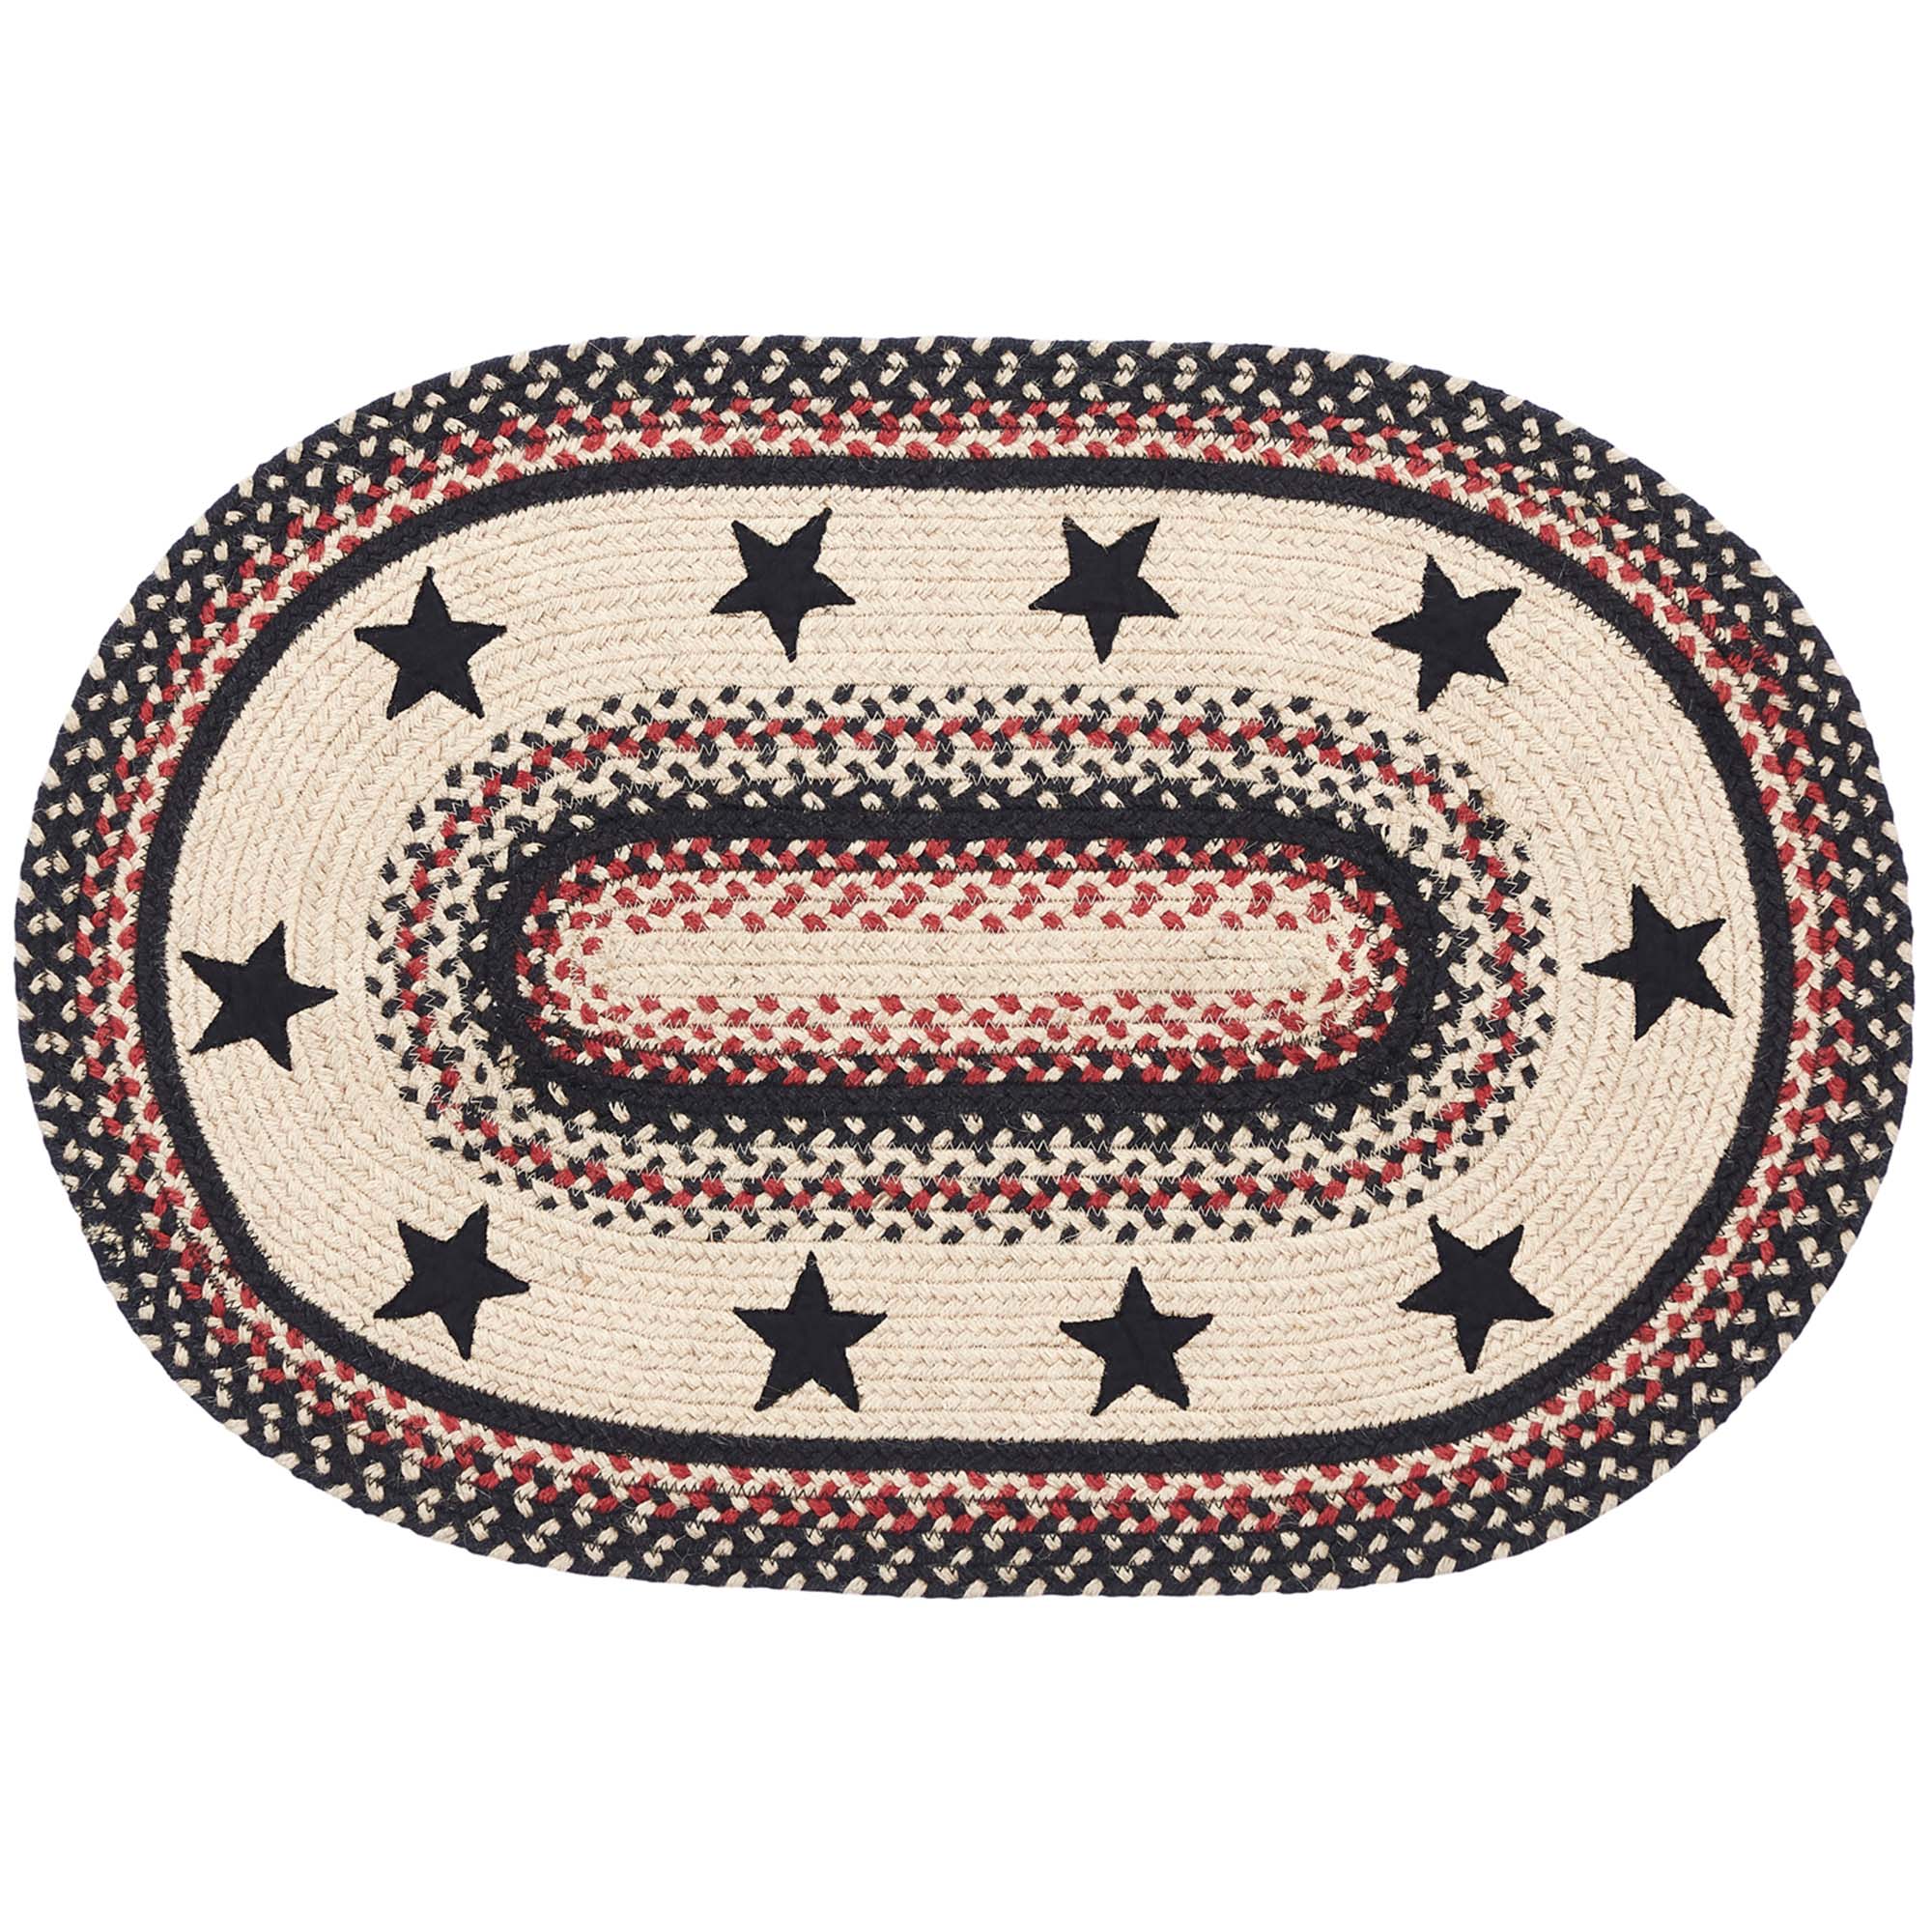 Colonial Star Jute Braided Rug Oval with Rug Pad 20"x30" VHC Brands